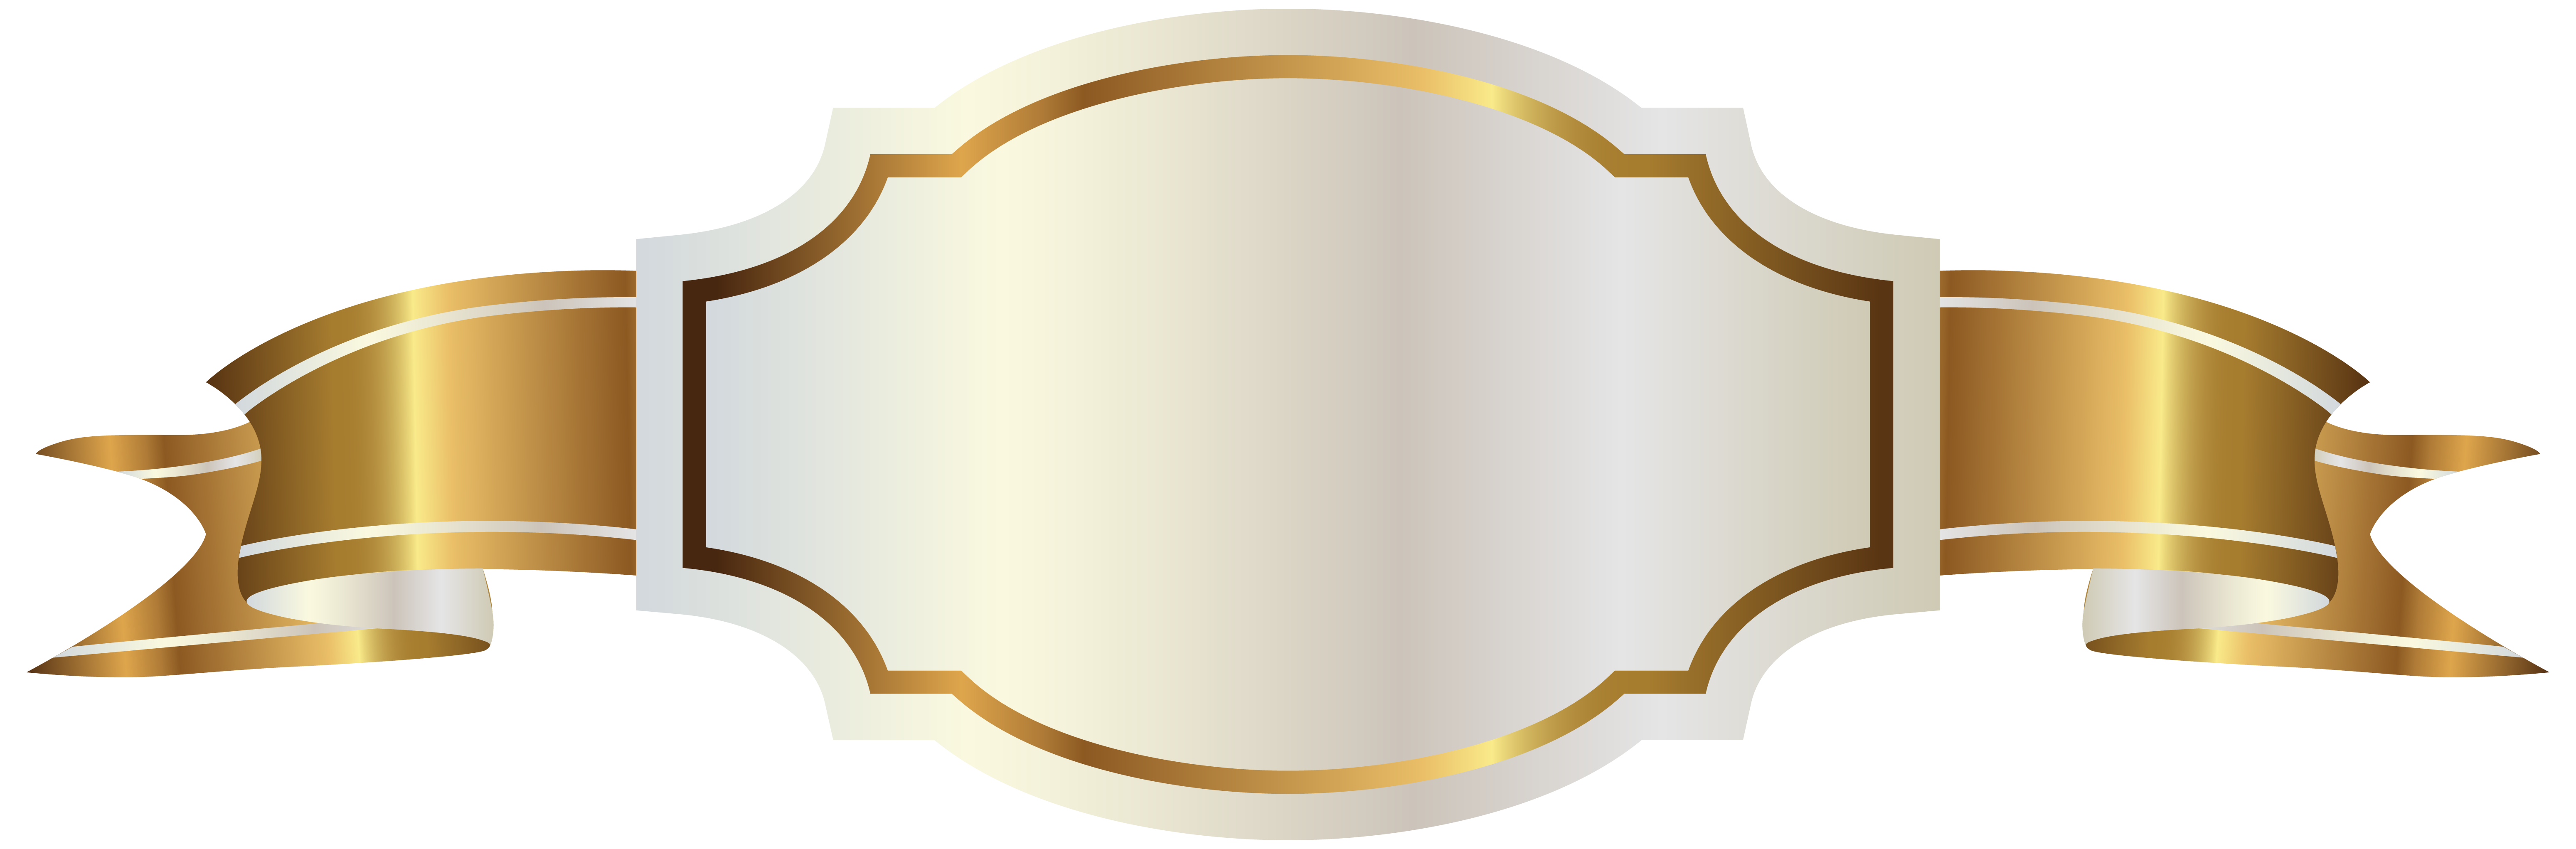 And White Banner Gold Label Download Free Image Clipart